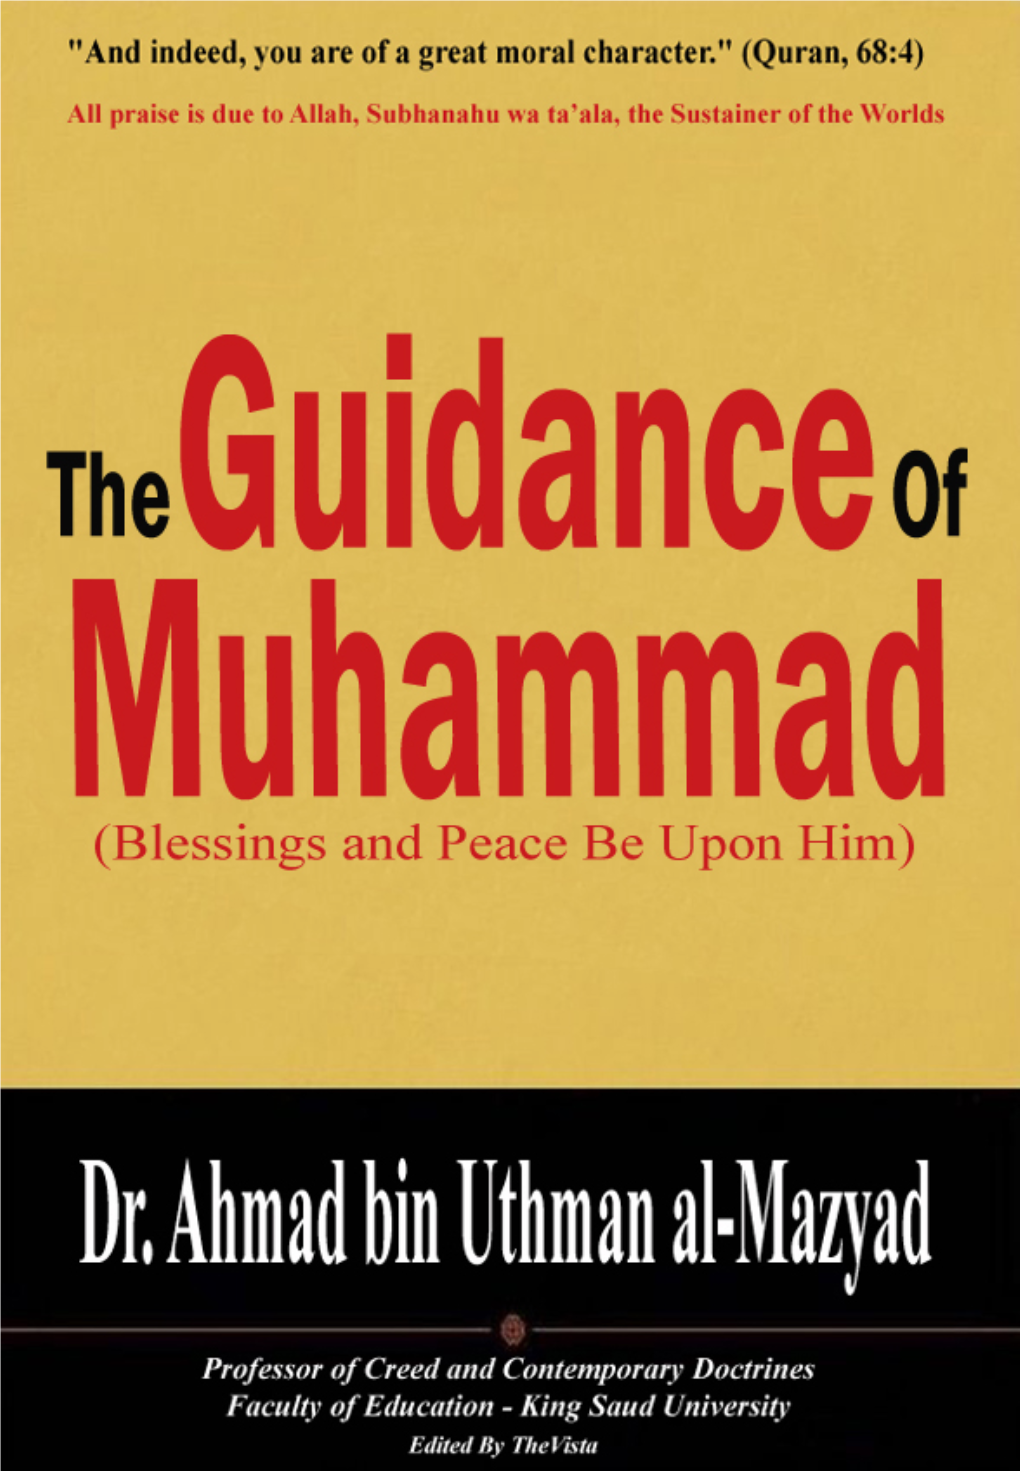 The Guidance of Muhammad (Peace Be Upon Him)